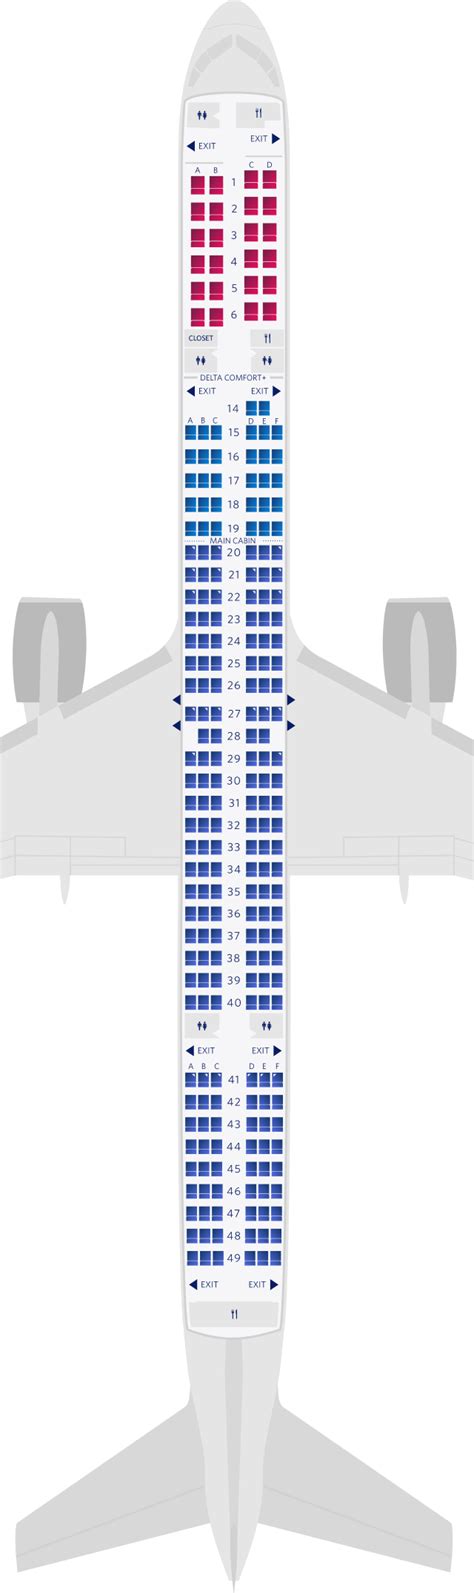 The United Boeing 767-300ER version presented here is a fully refurbished aircraft. The aircraft contains United's Polaris, Premium Plus (Premium Economy), Economy Plus, and Economy product as of 2019. The aircraft are commonly used on transatlantic routes. - Polaris includes 46 open suite business class seats that transform into fully flat beds.